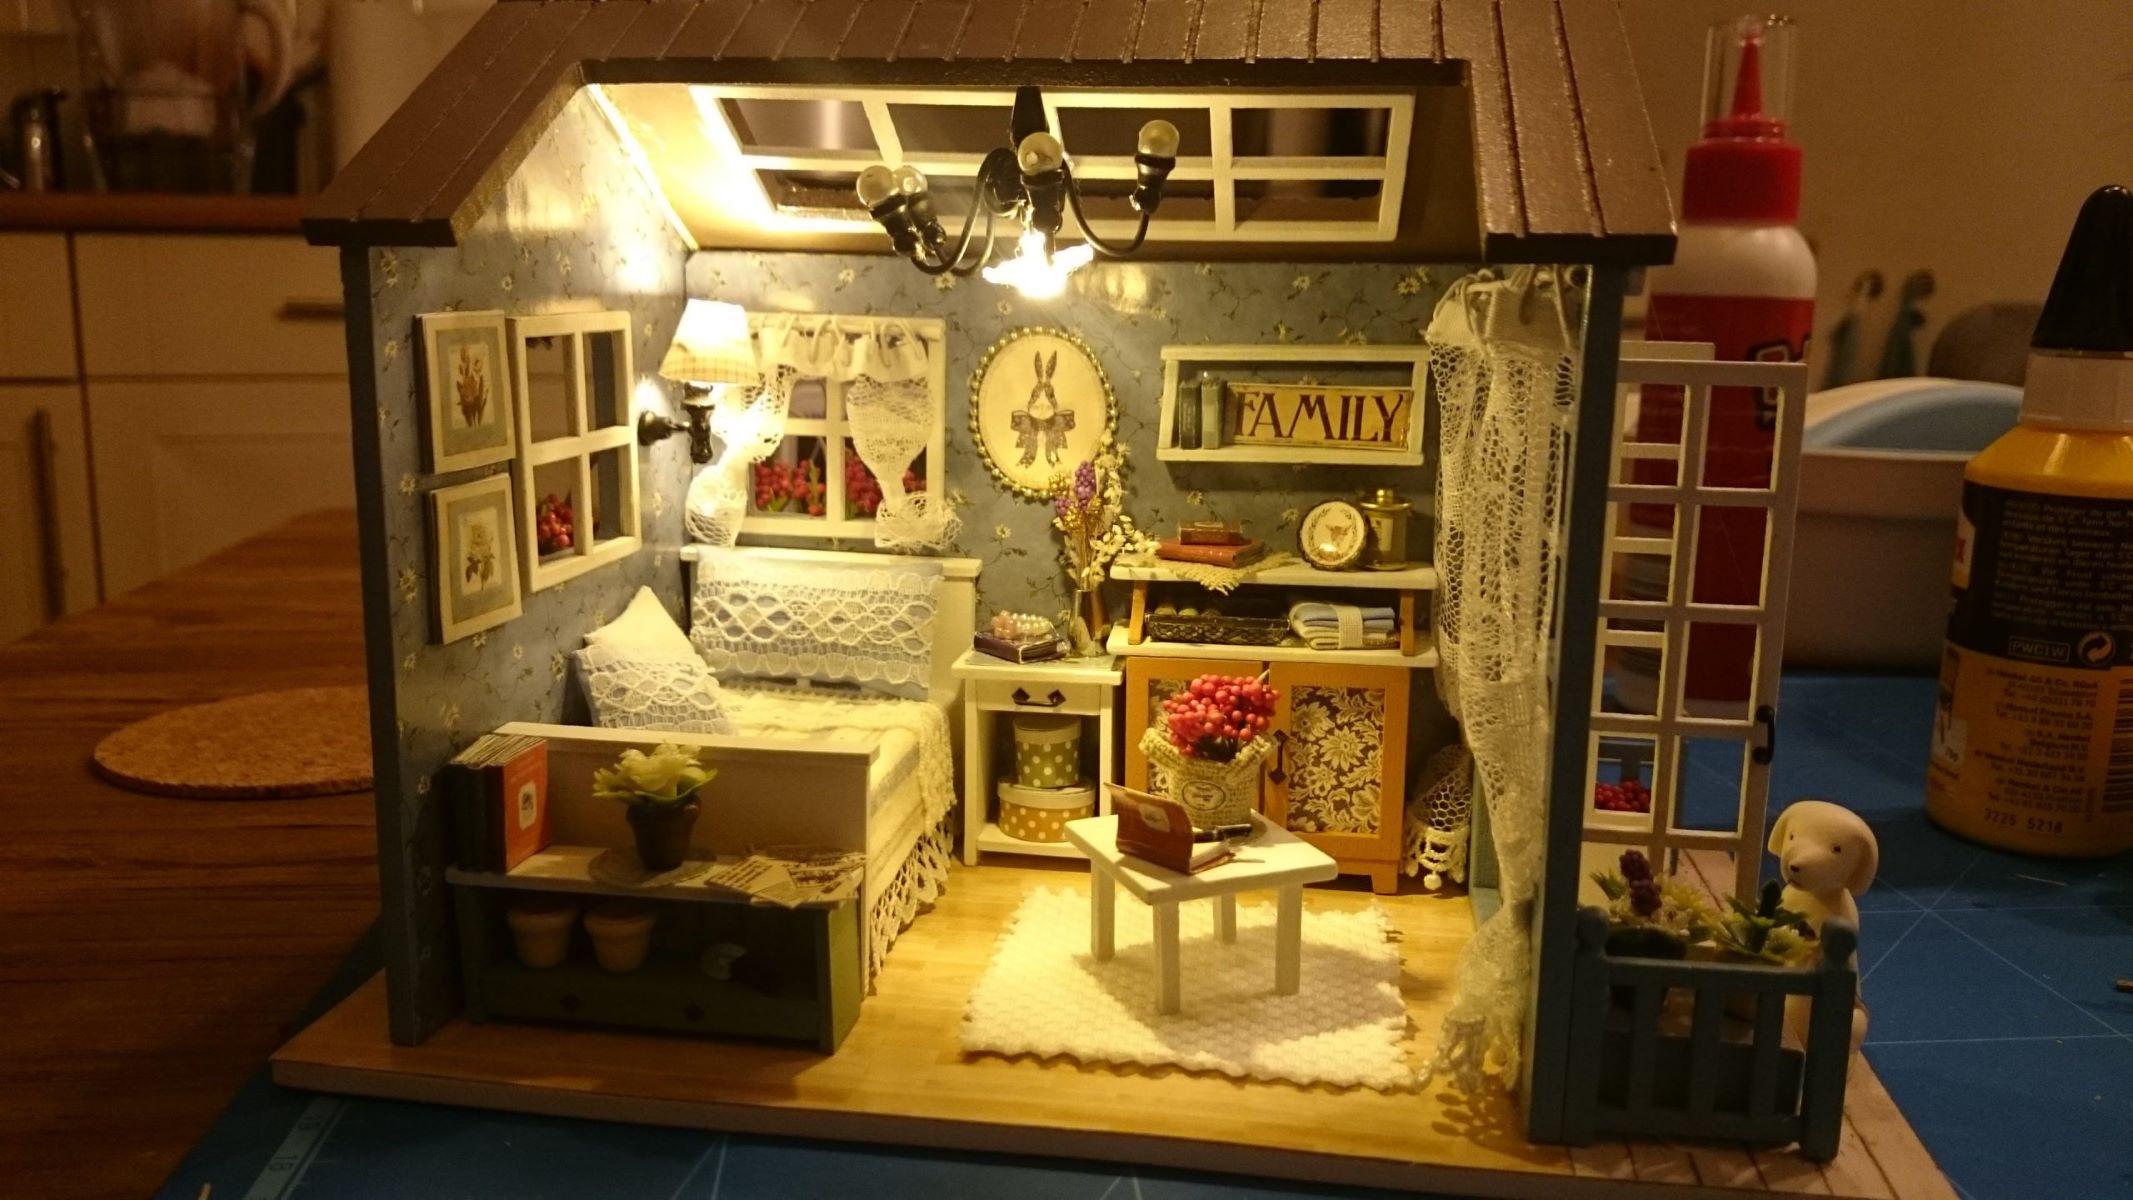 DIY Projects For Kids: How To Make Your Own Dollhouse With Instructions